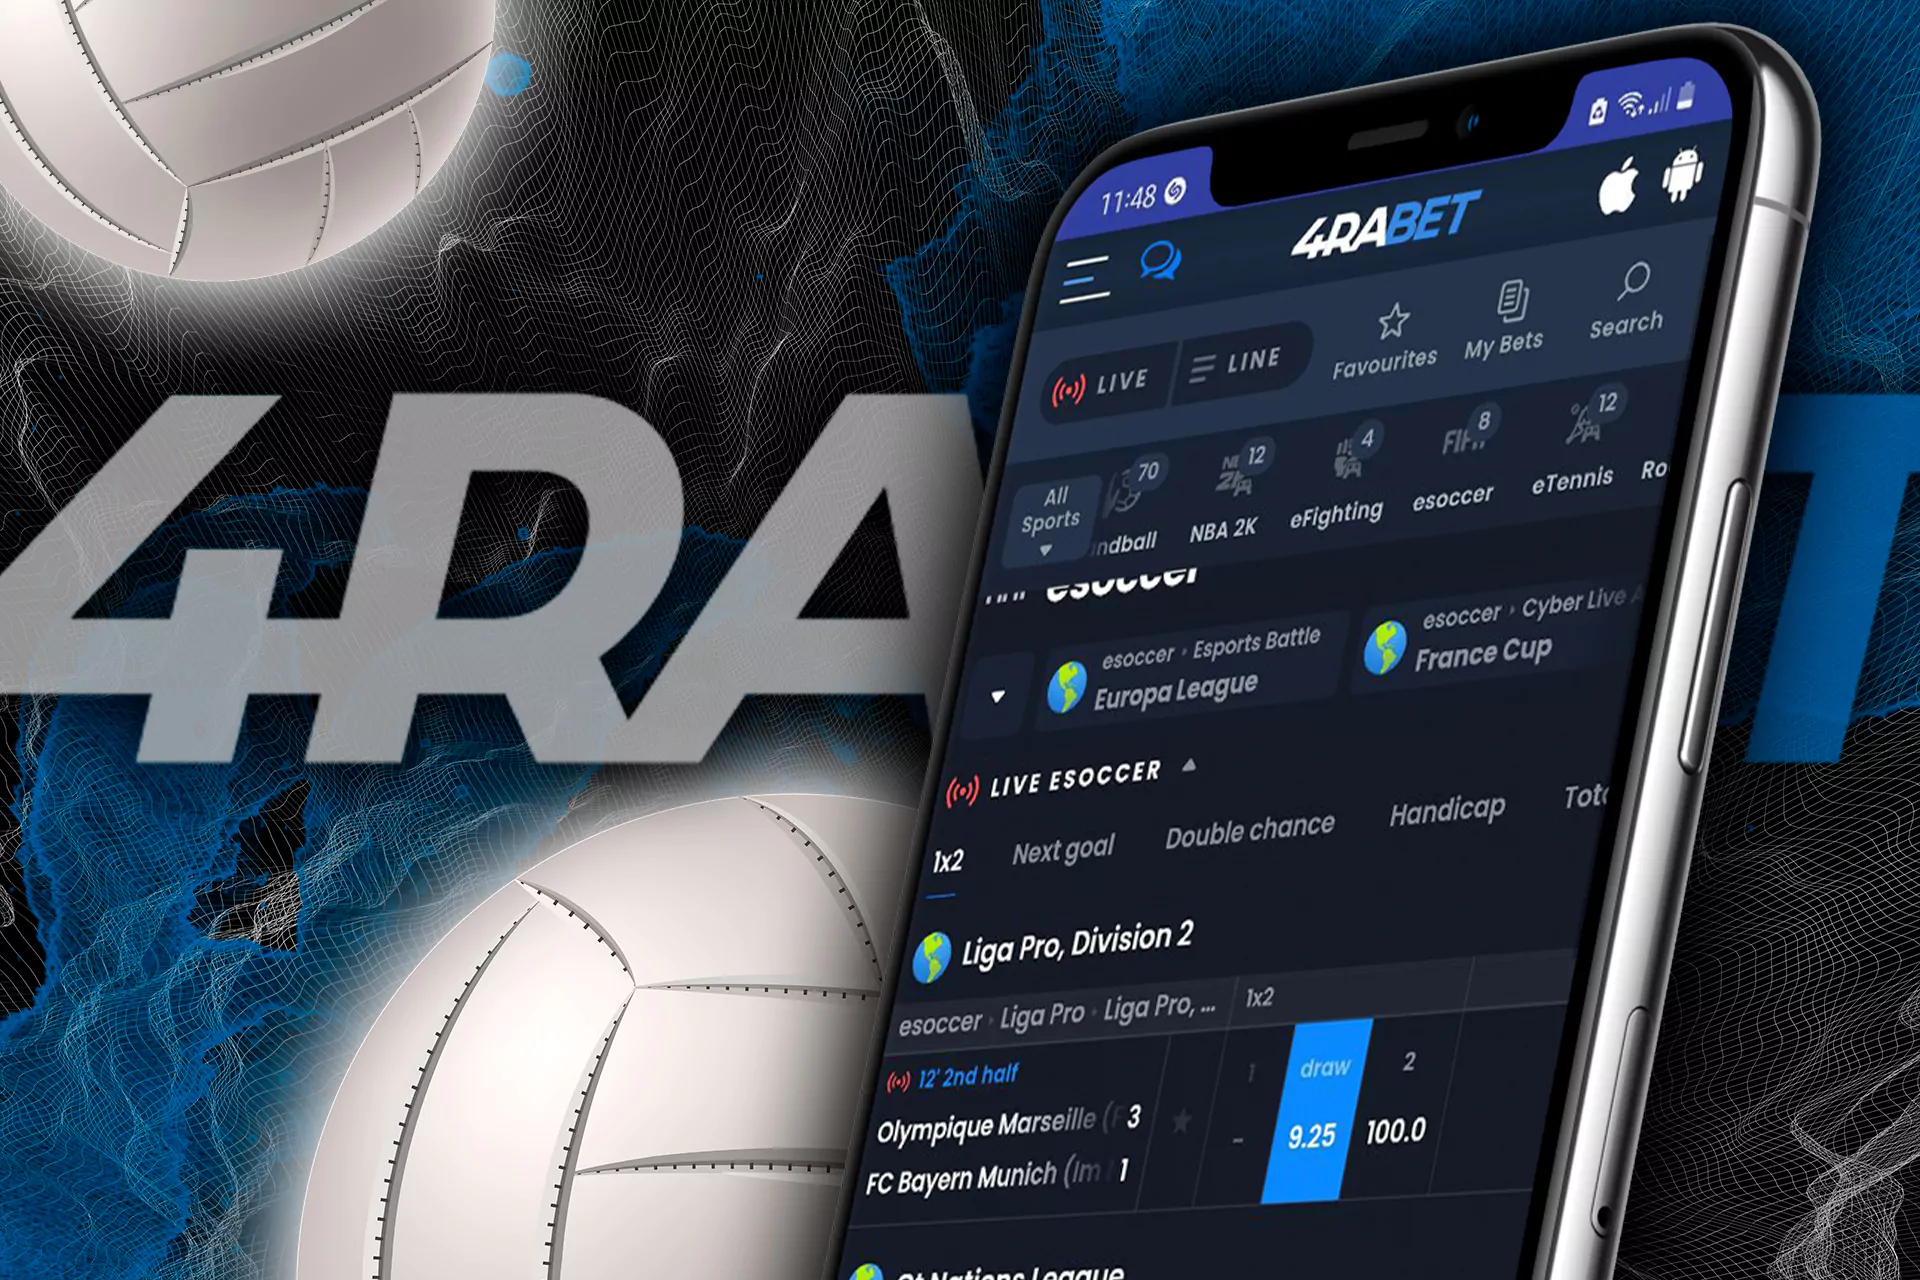 Find the sports betting section in your app.